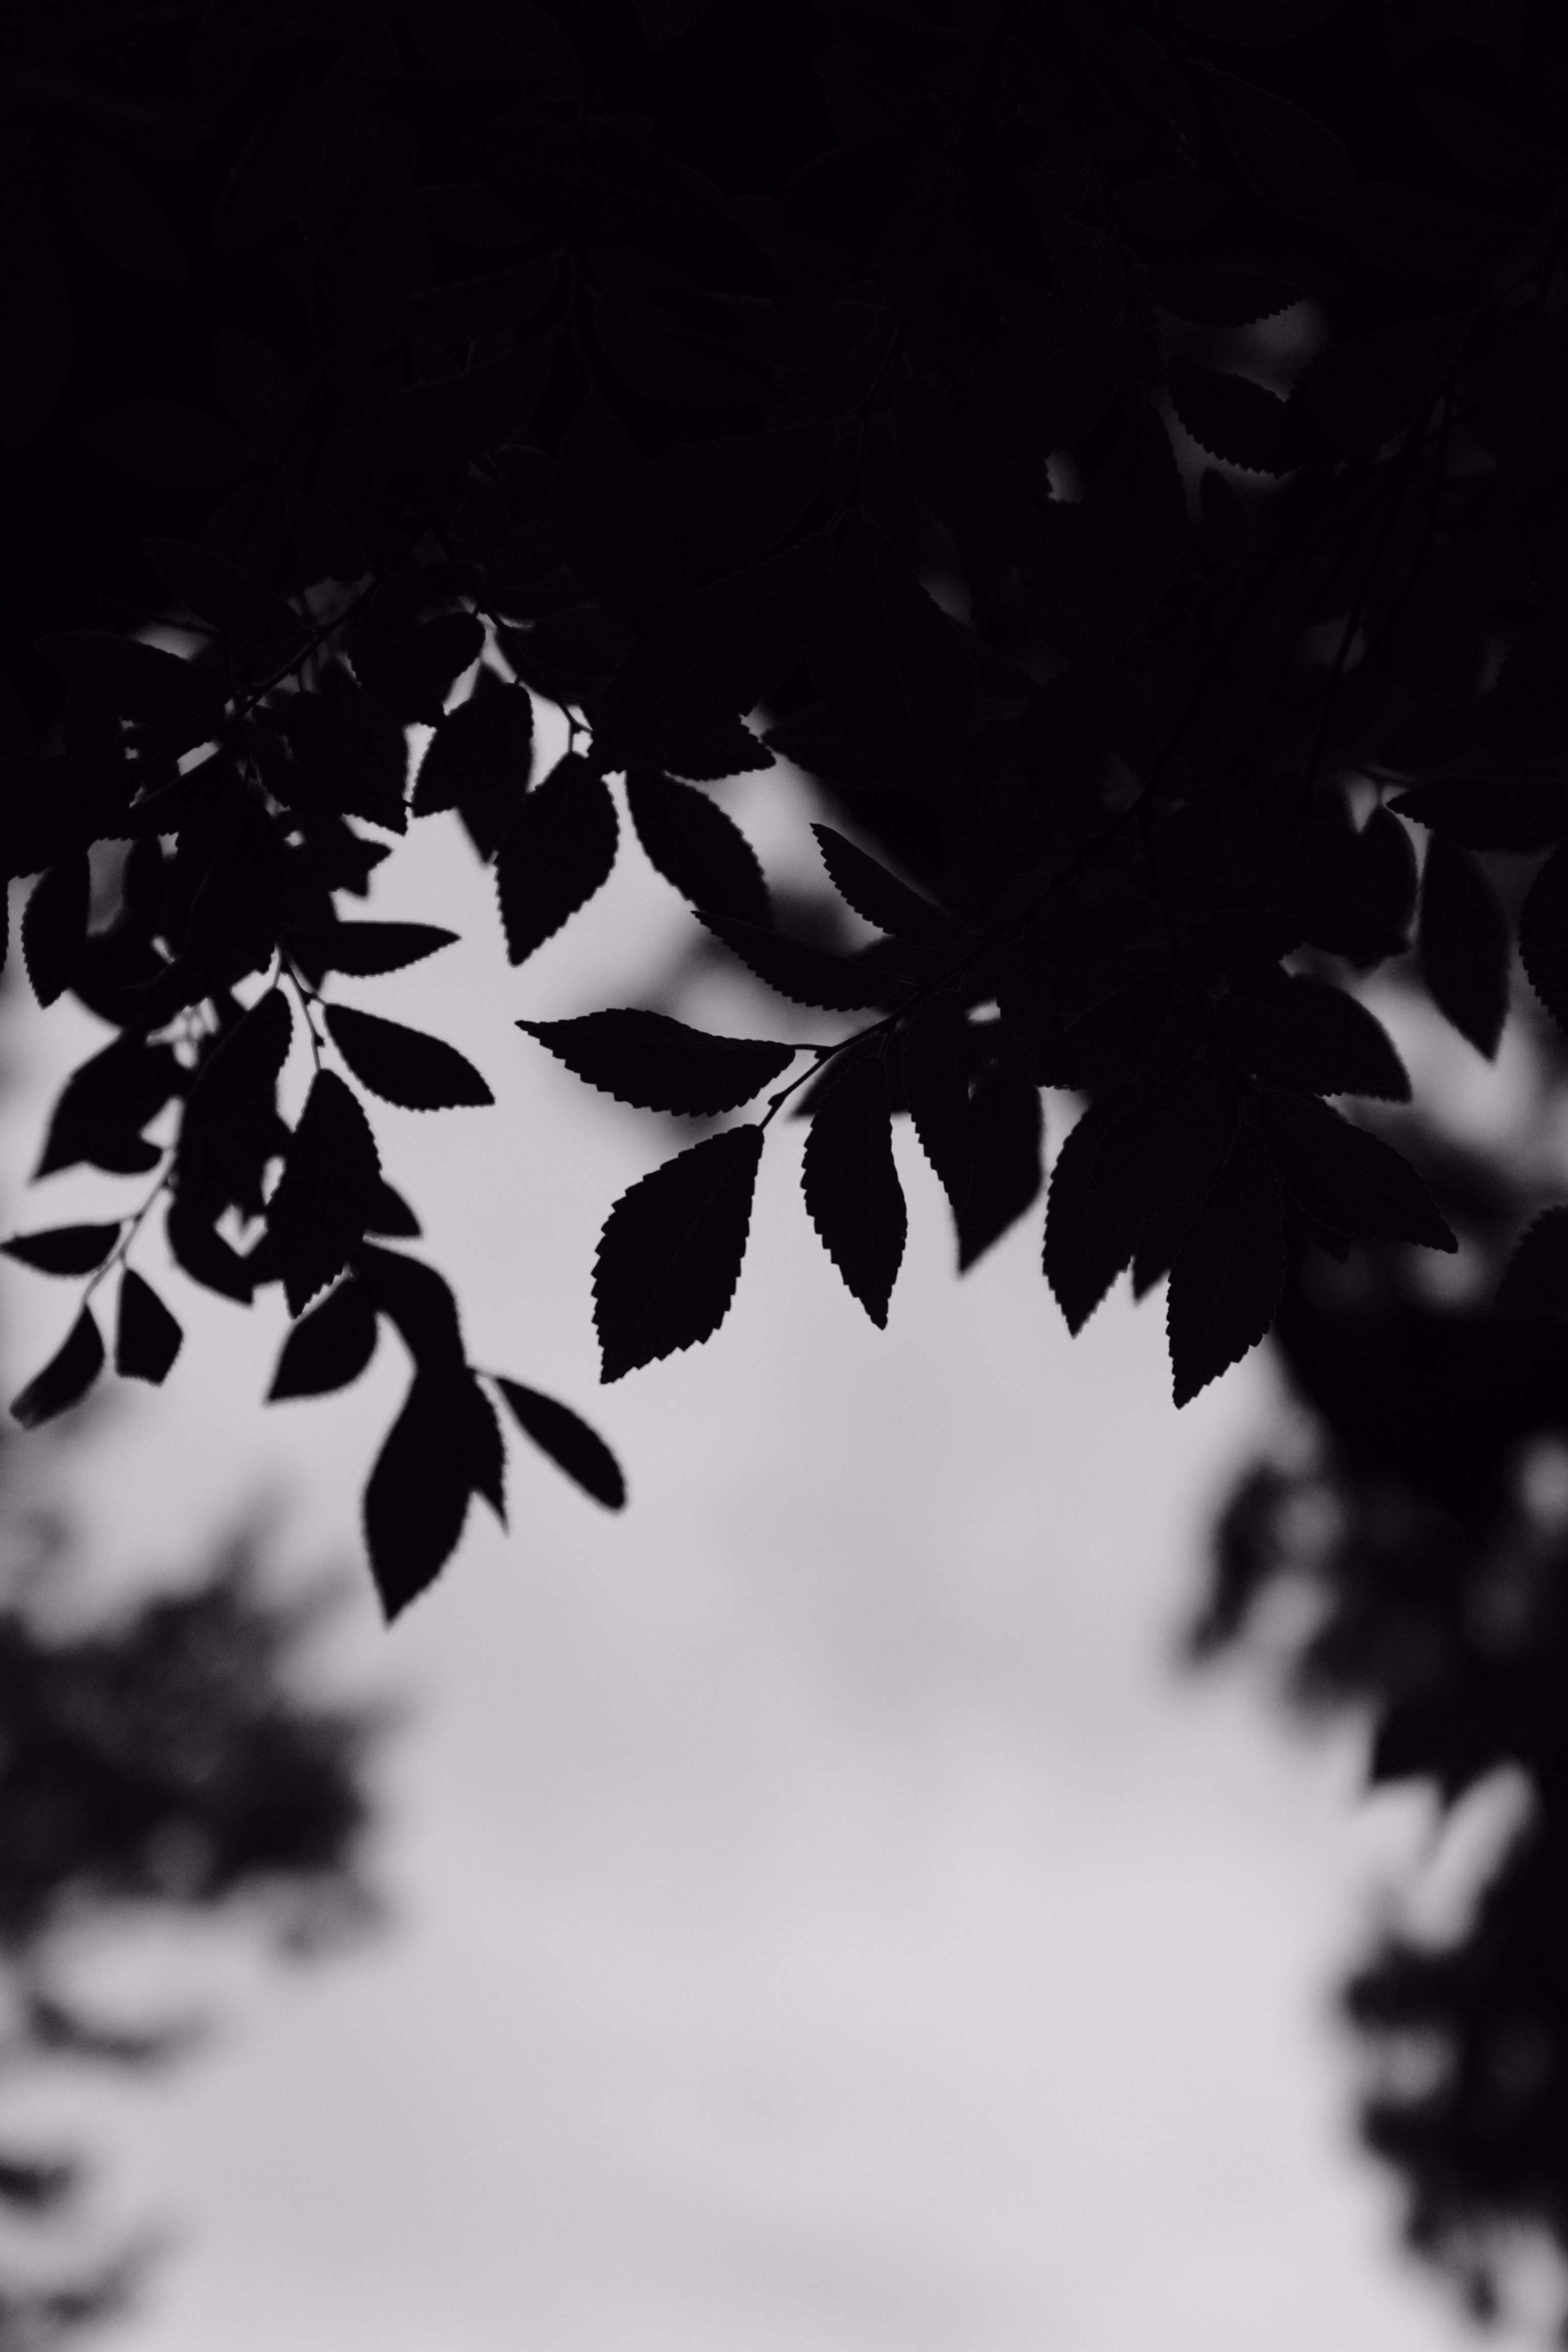 black, leaves, outlines, chb, branches, bw cellphone